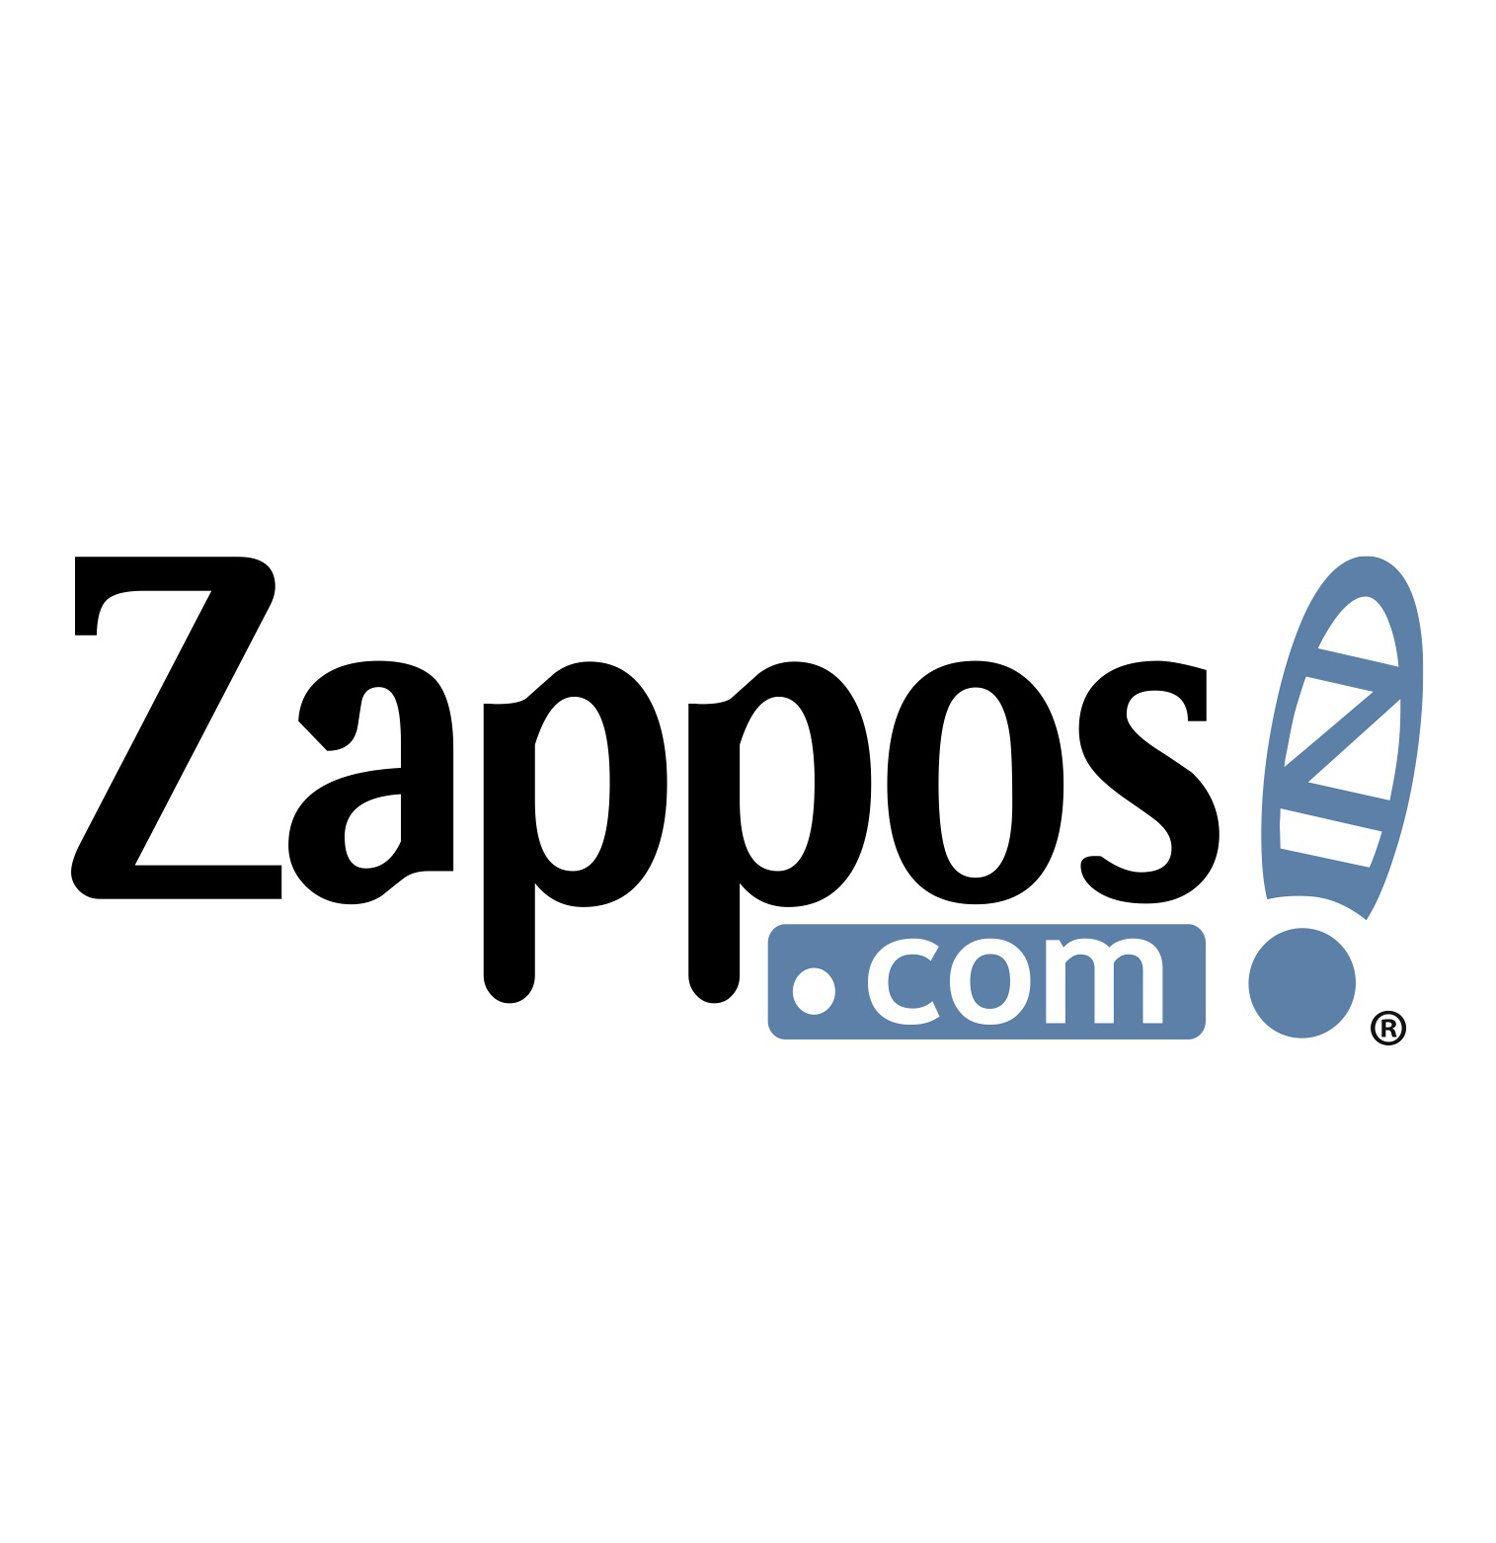 Zappos Logo - What You Need to Know About Zappos' New Loyalty Program